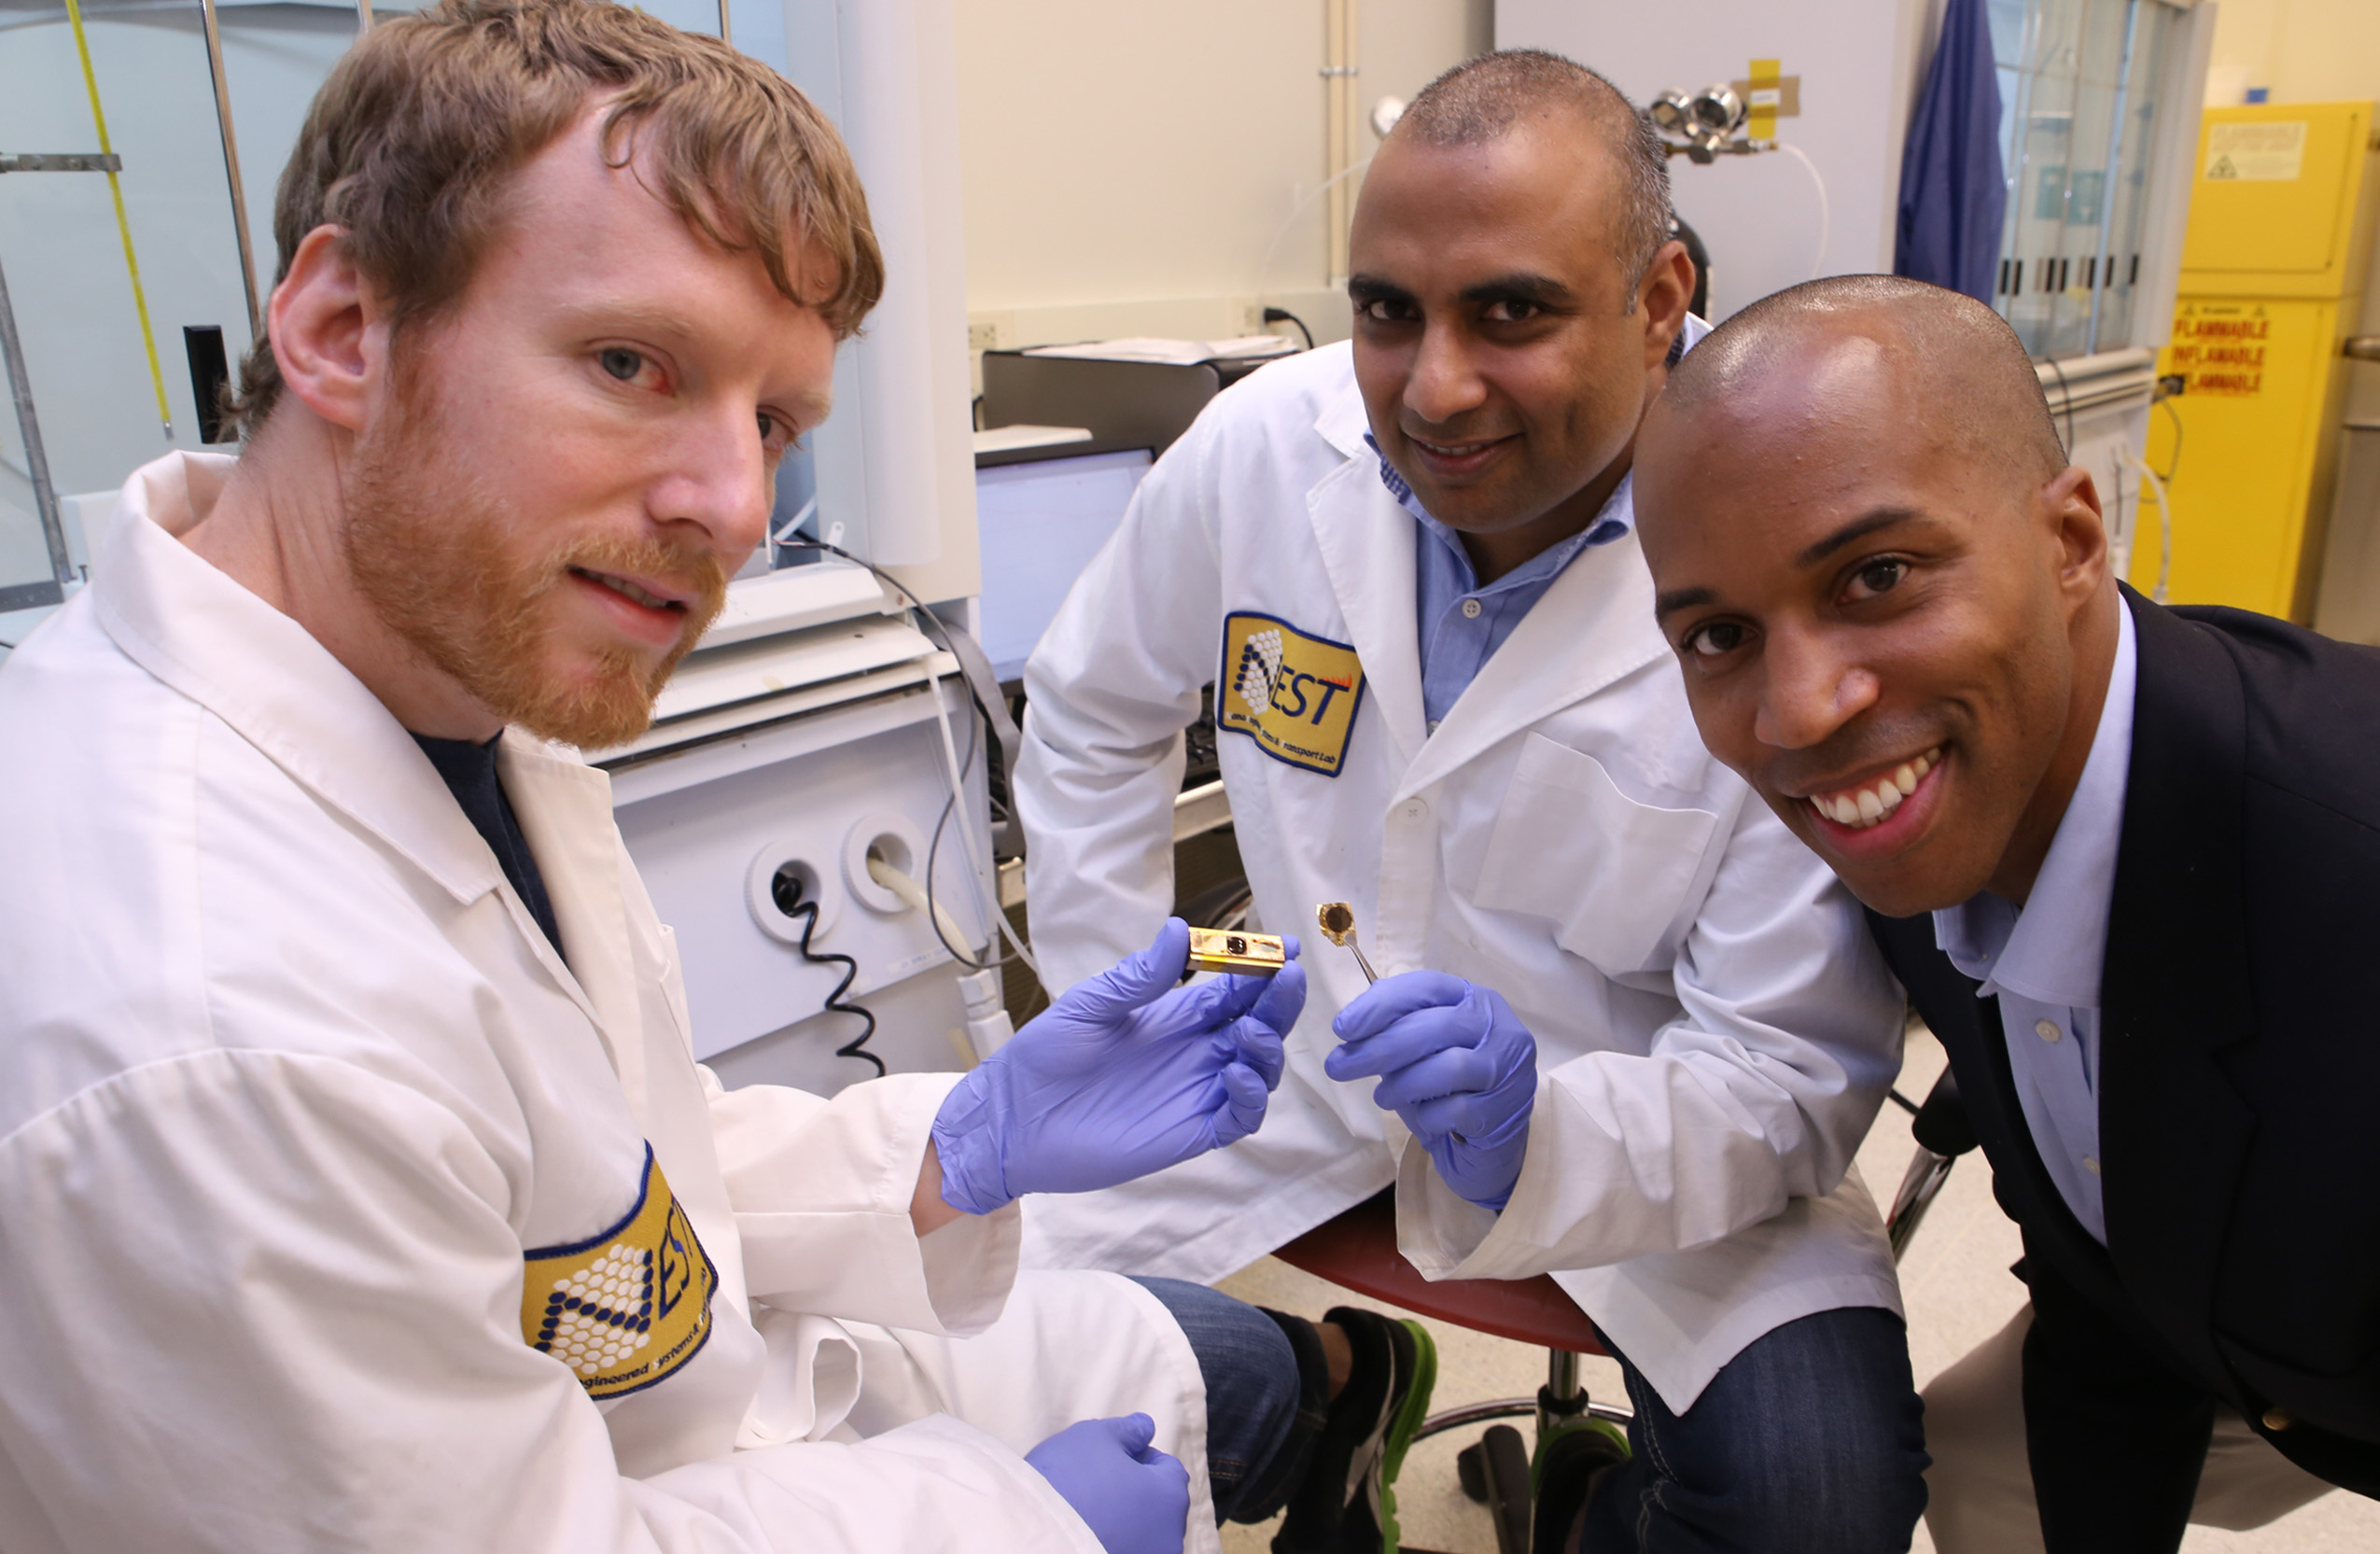 Georgia Tech researchers have developed a polymer material that can reliably conduct heat from electronic devices. Shown (l-r) are Thomas Bougher, a Ph.D. student in the George W. Woodruff School of Mechanical Engineering, Virendra Singh, a research scientist in the Woodruff School, and Baratunde Cola, an assistant professor. (Georgia Tech Photo: Candler Hobbs)